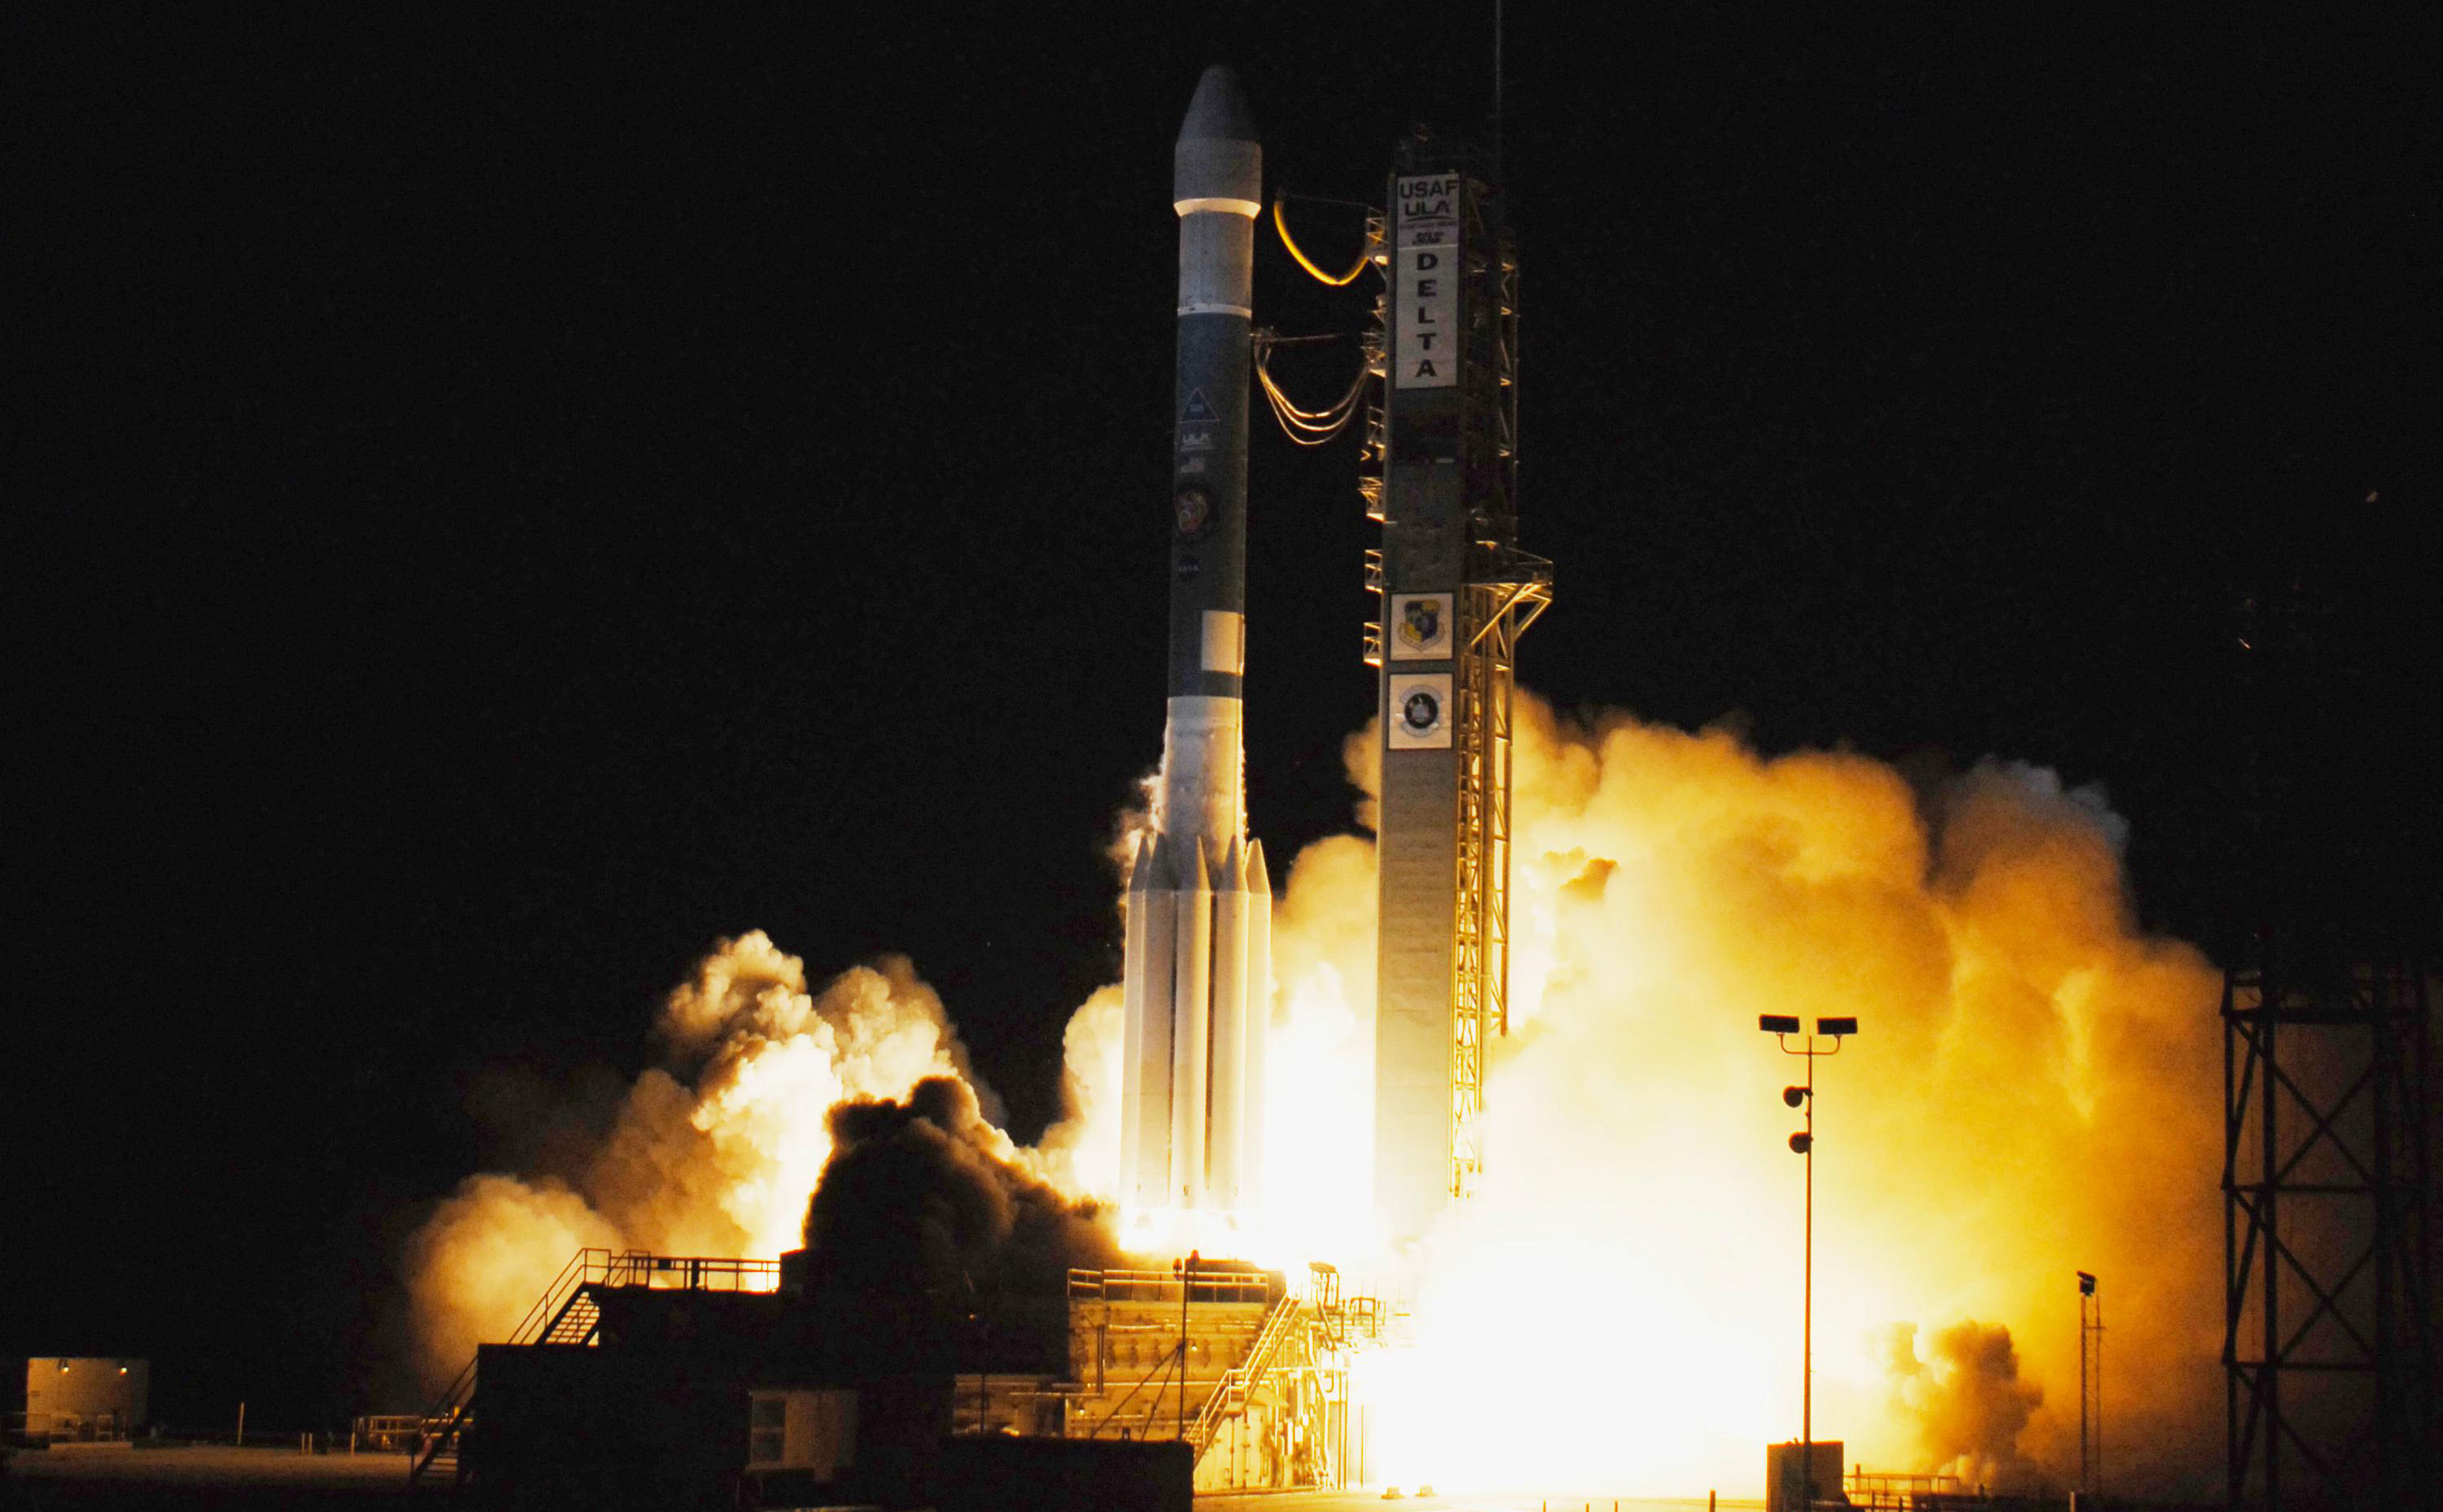 Delta II rocket lifts off the launch pad with the Phoenix spacecraft onboard.